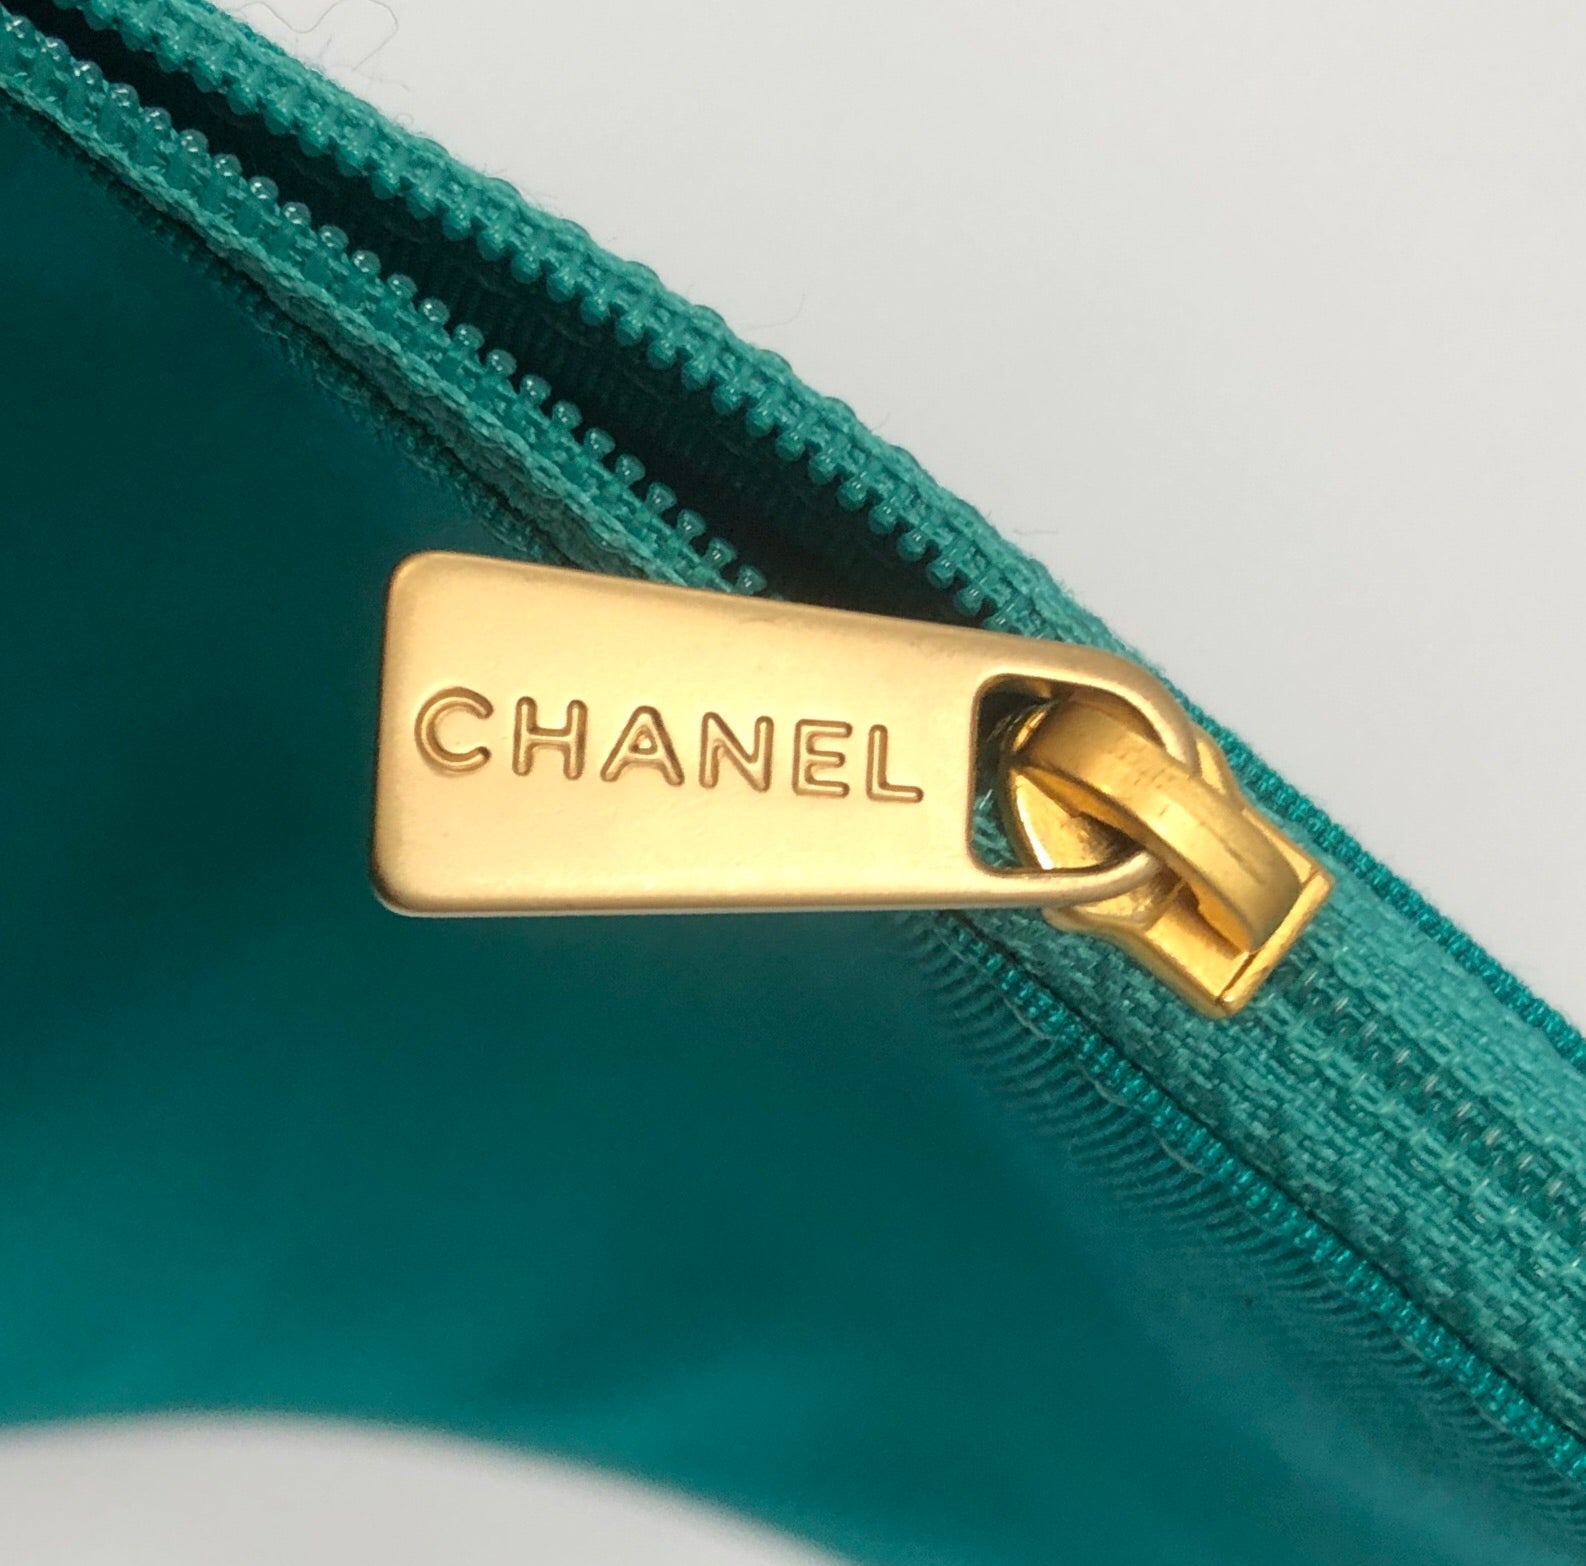 Chanel Turquoise Logo and Clear PVC Tote